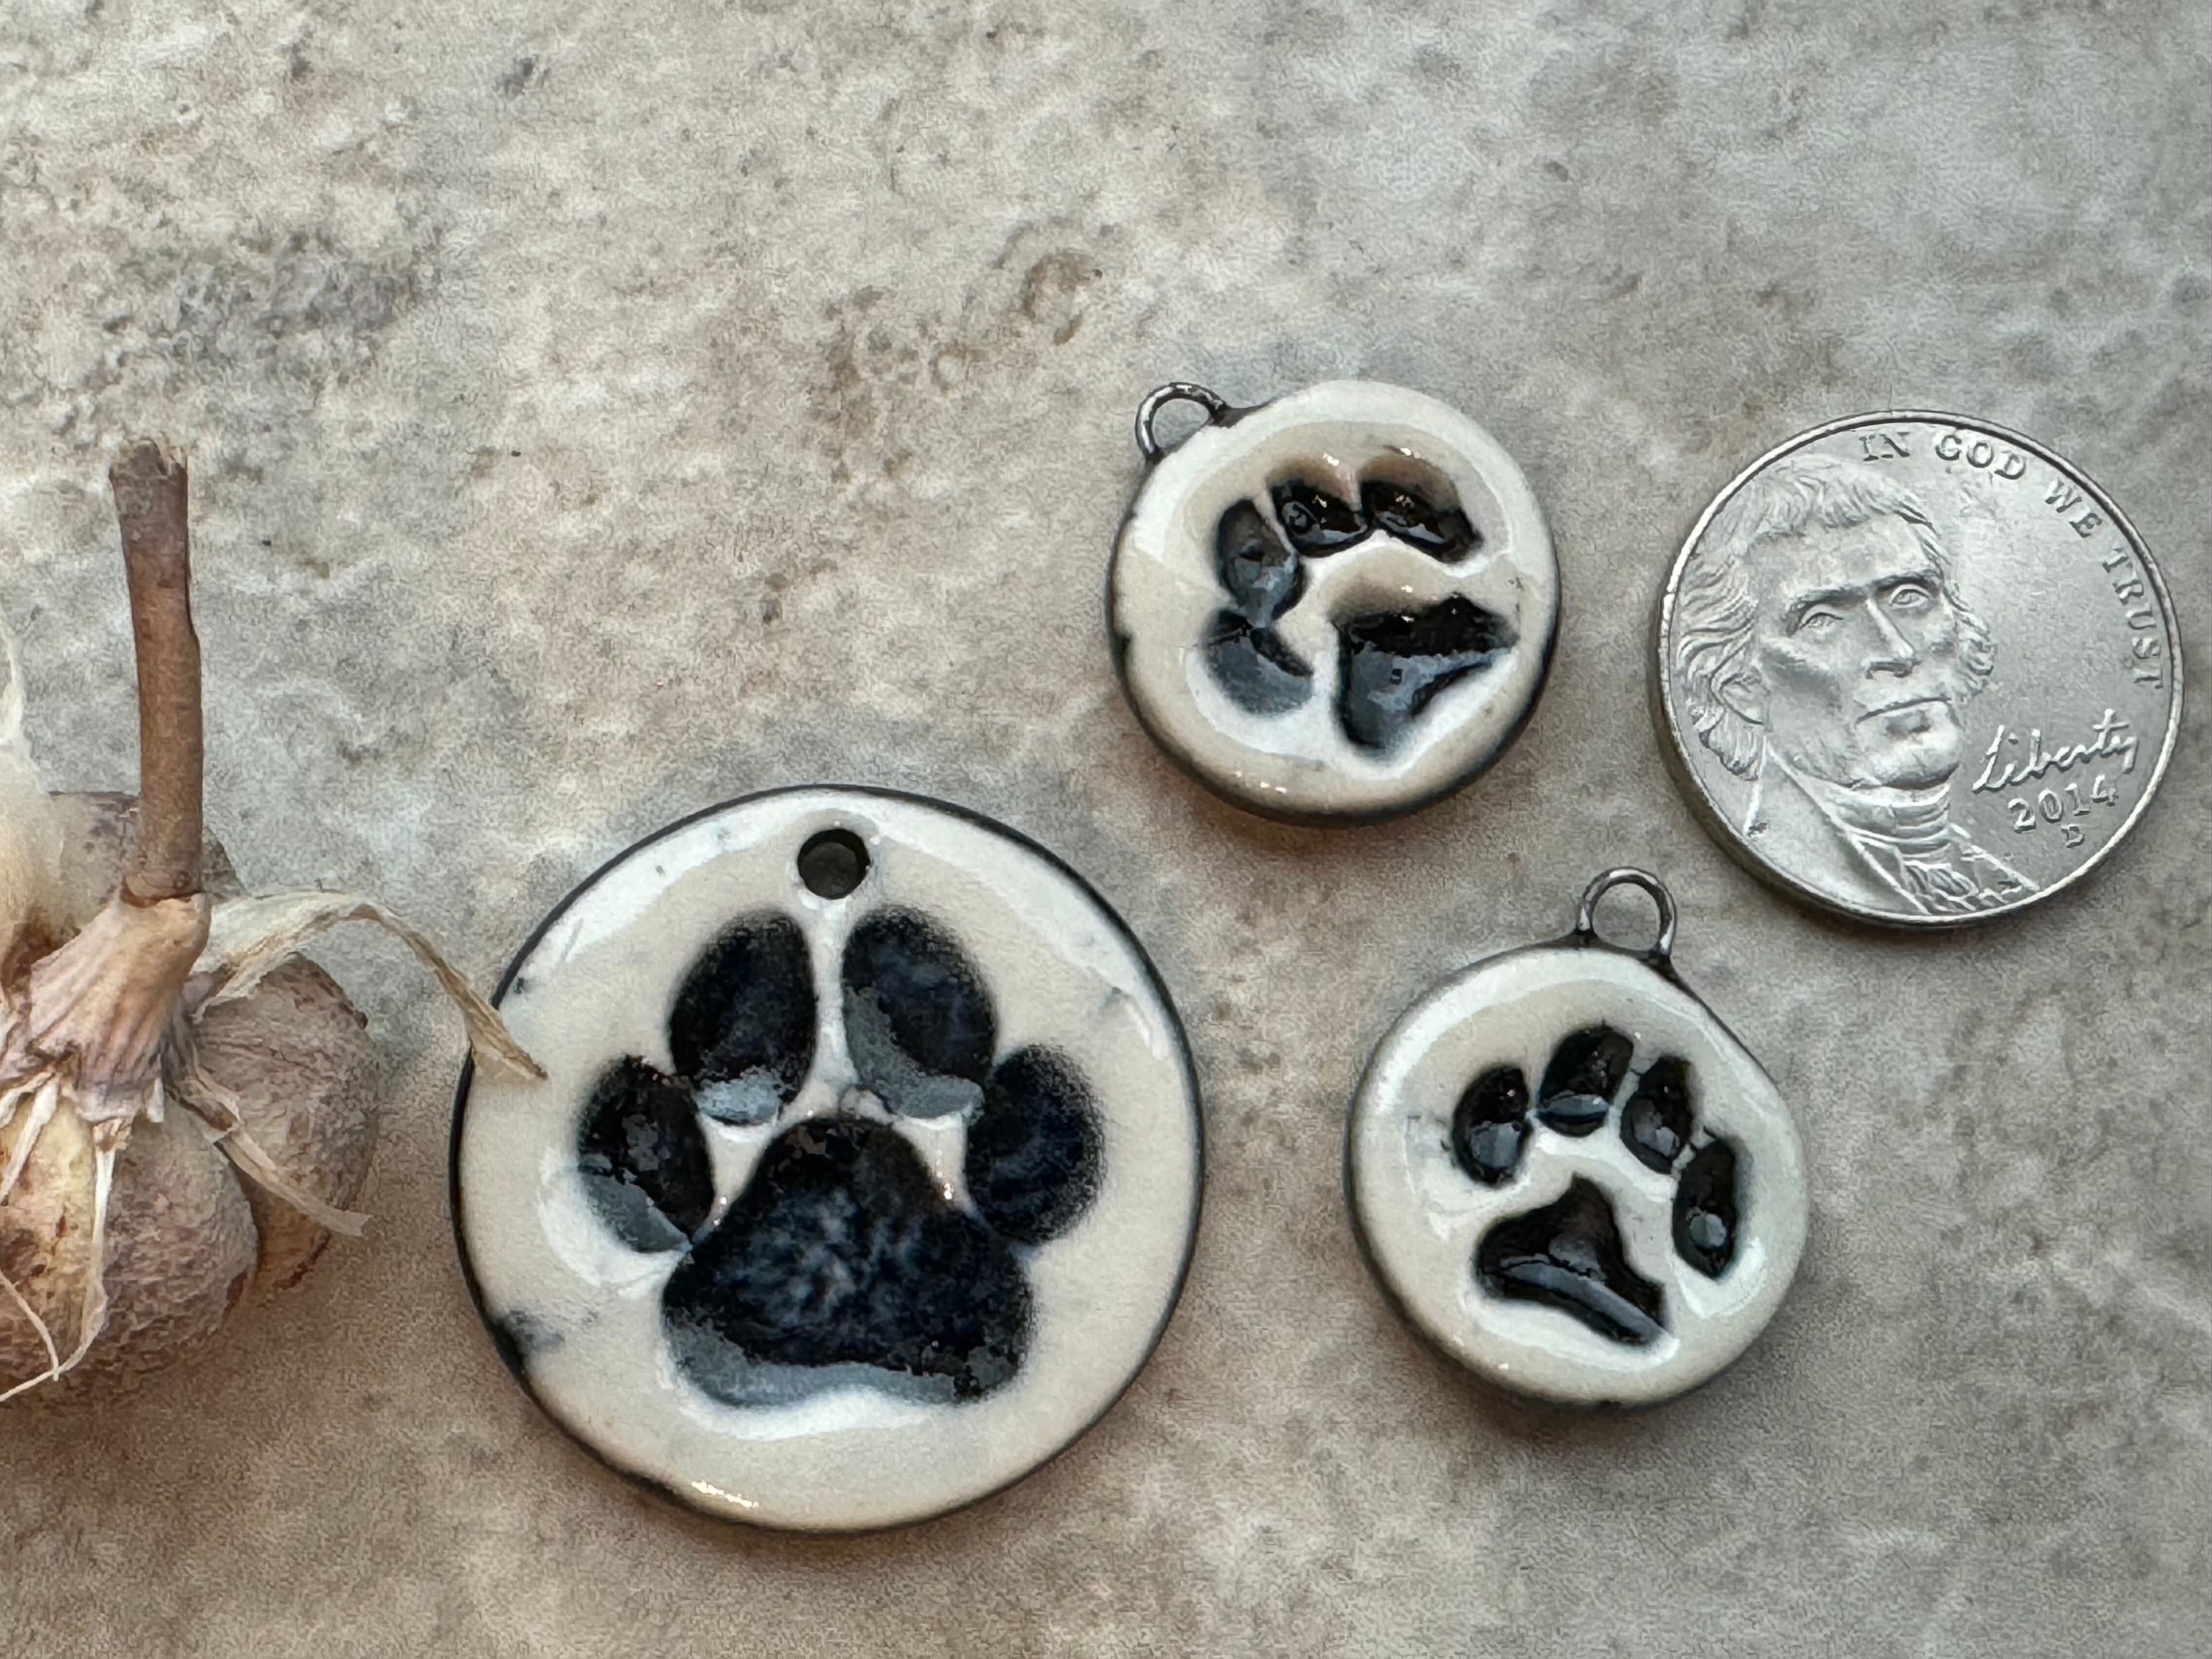 Black and White Paw Print Pendant and Charms, Dog Round Pendant, Porcelain Ceramic Pendant, Dog Paw Charms, Jewelry Making Components